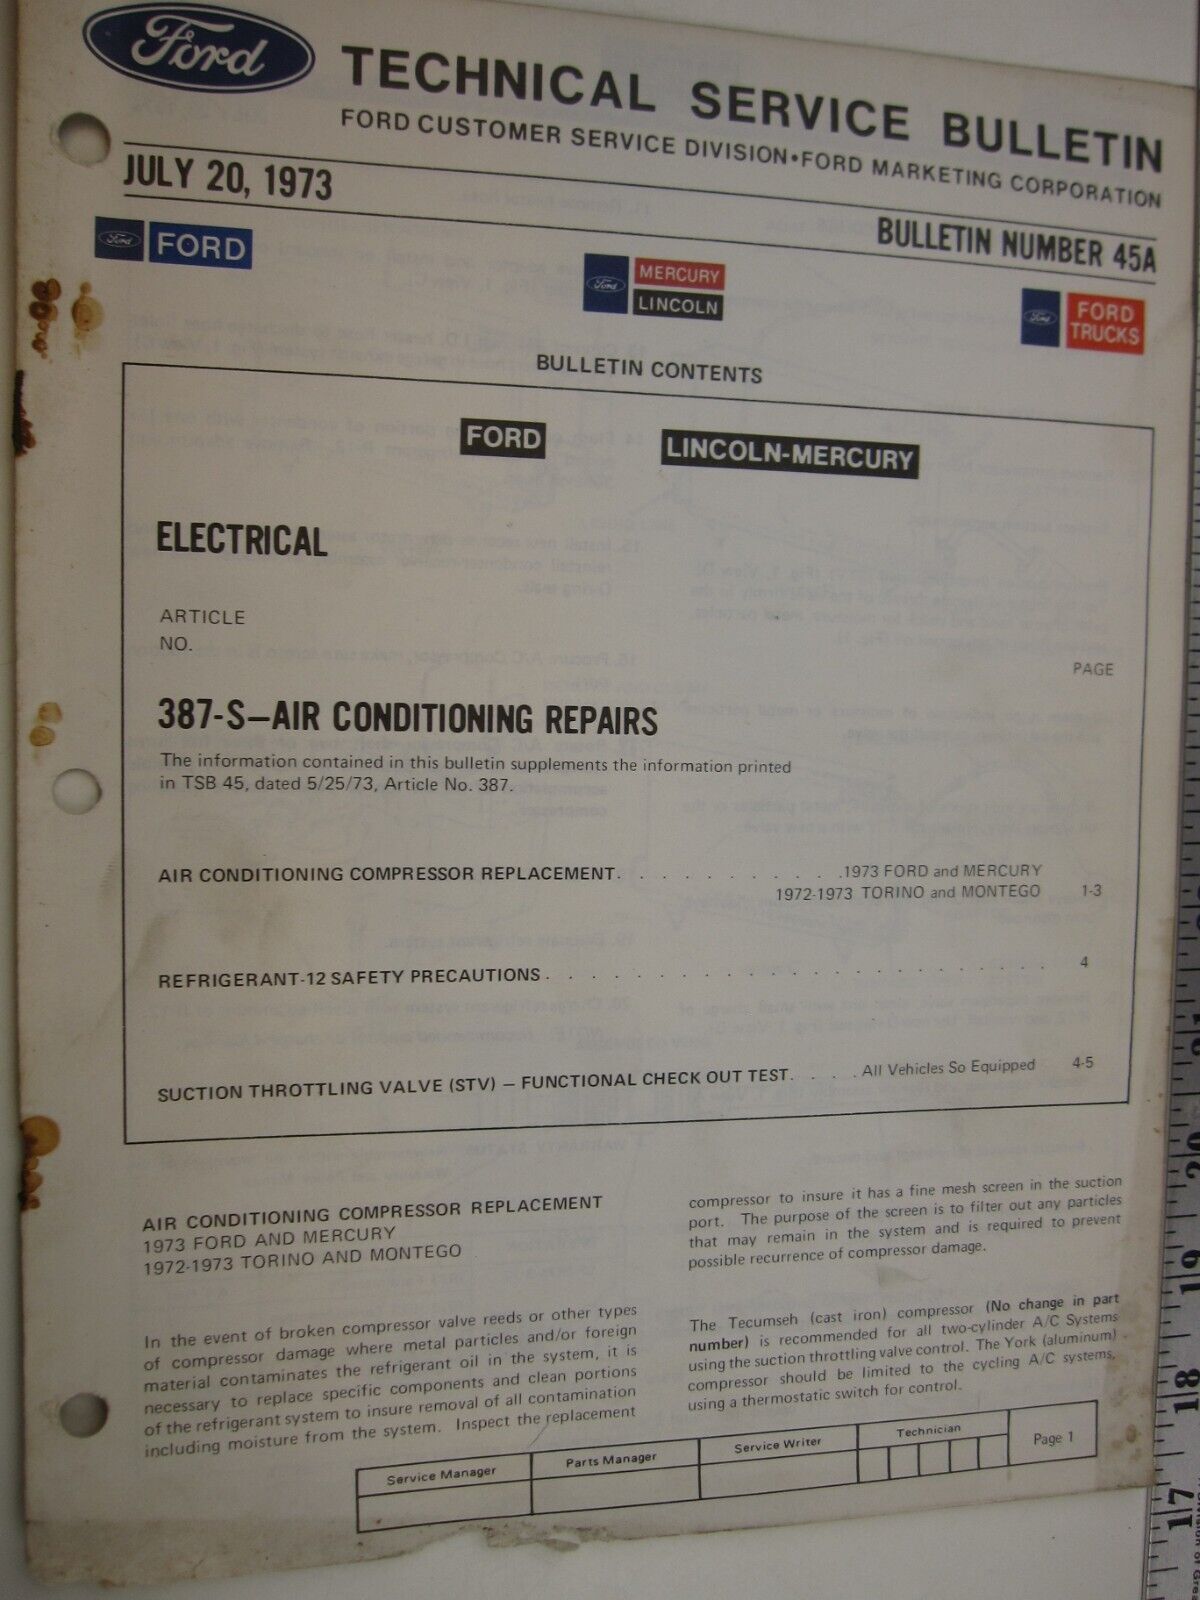 July 20, 1973 FORD Technical Service Bulletin Number 45A   BIS